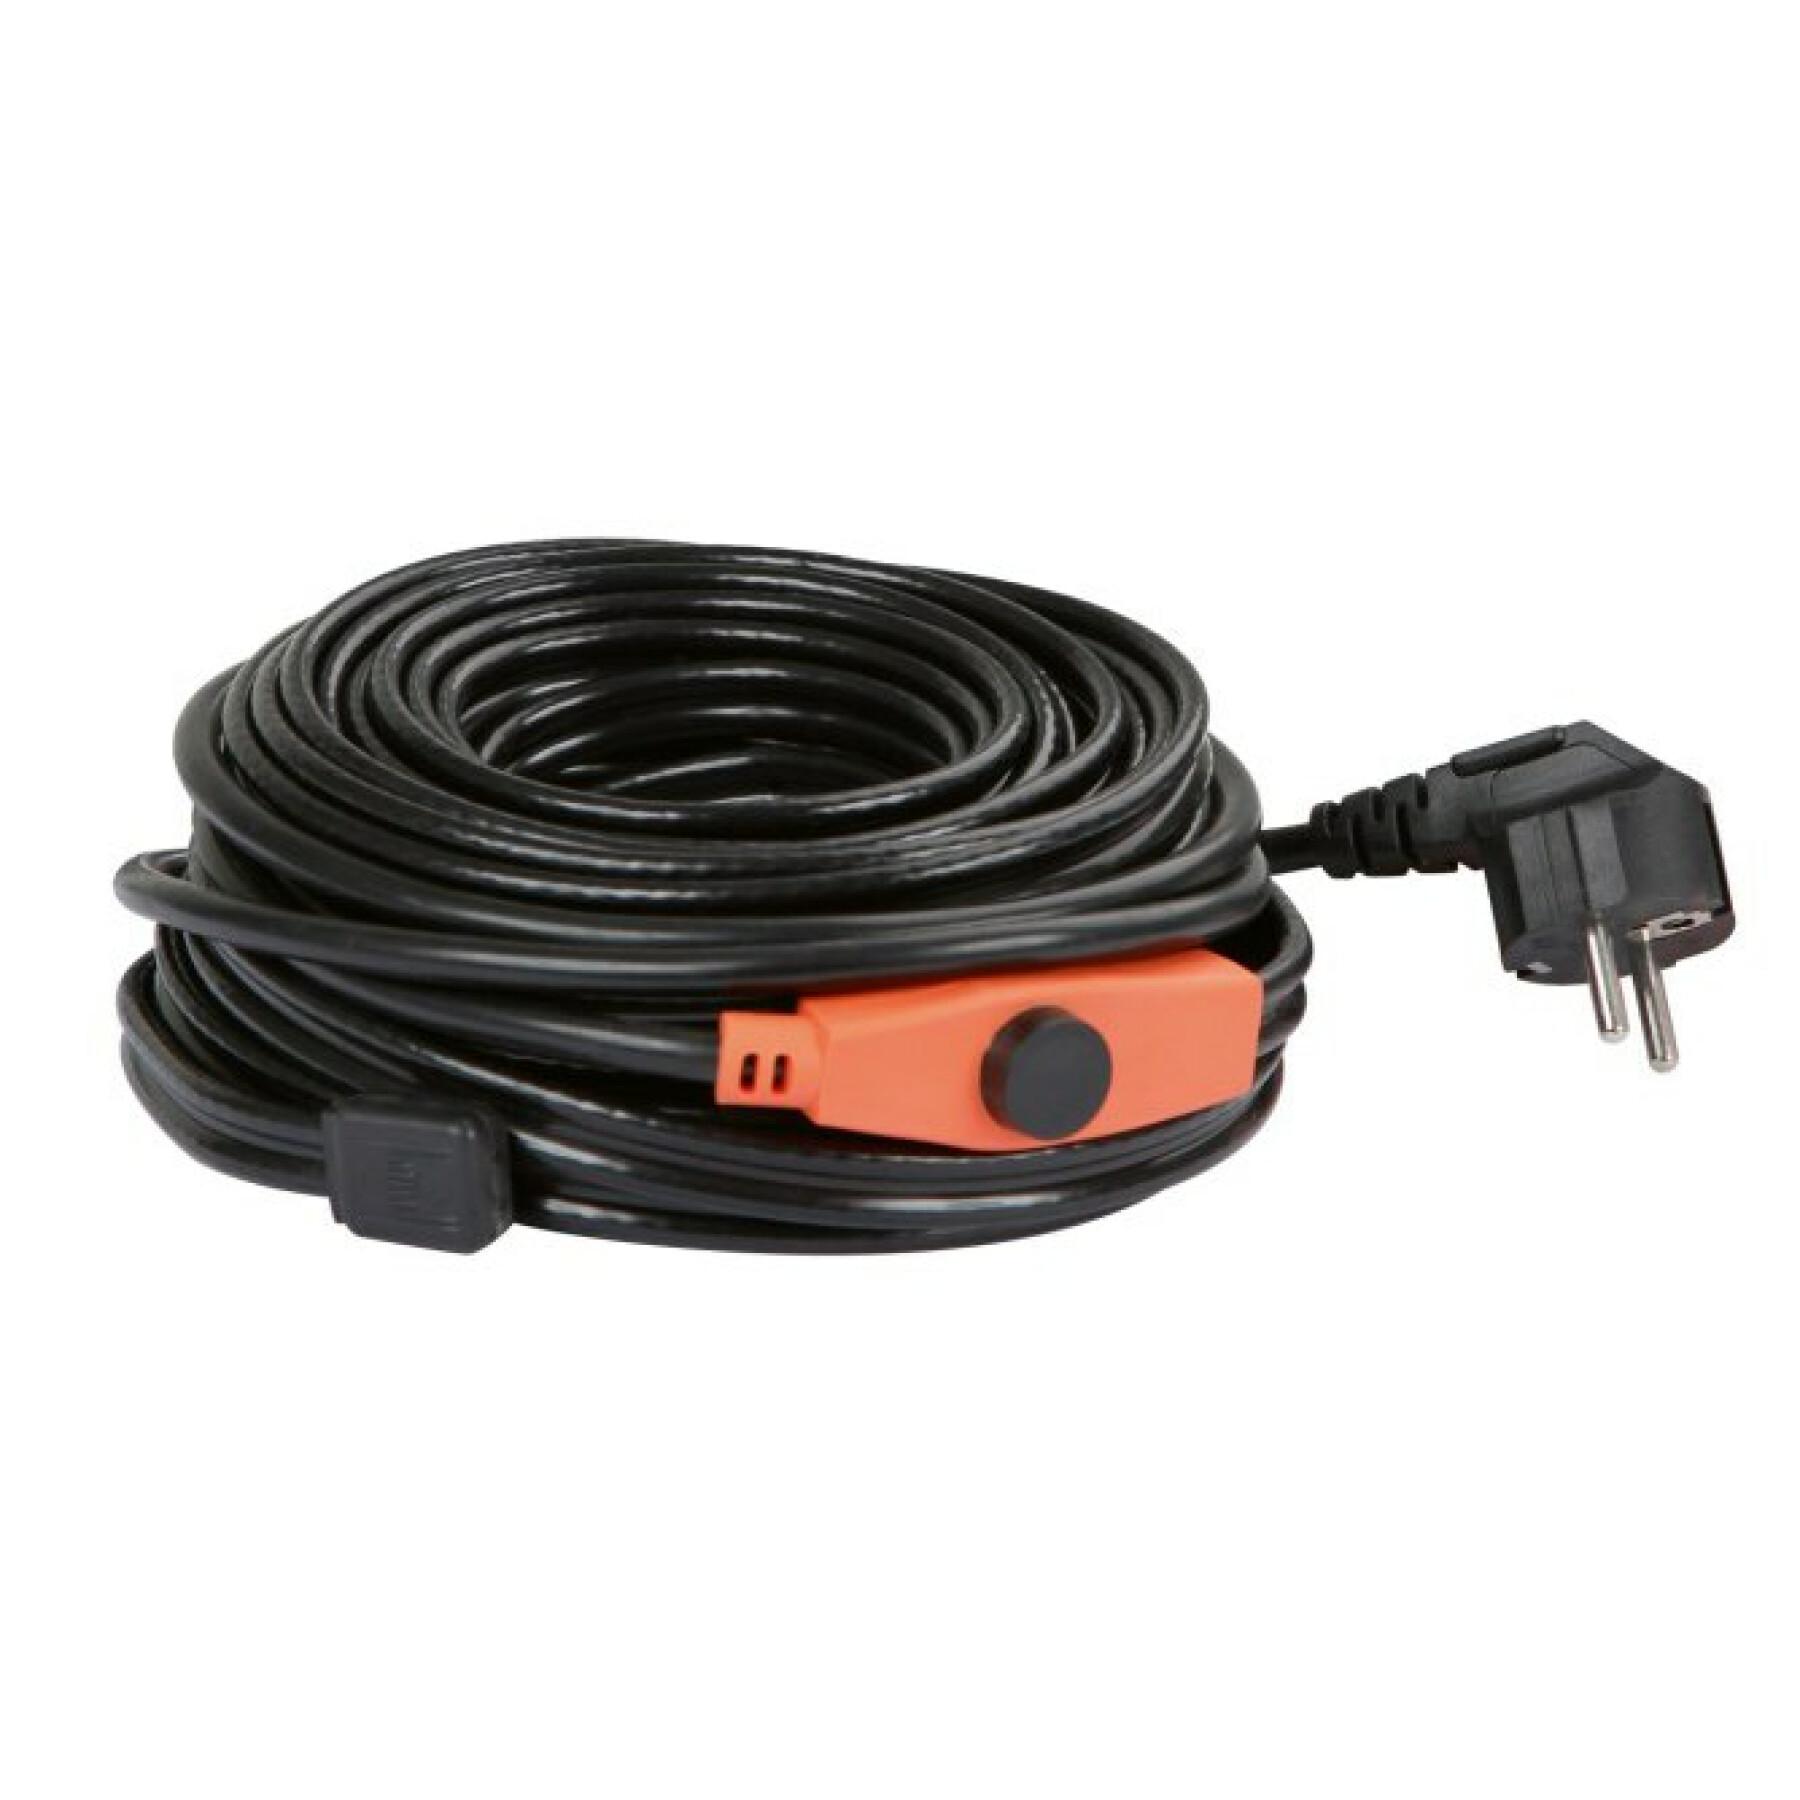 Heating cable Kerbl 230V 18m,288W